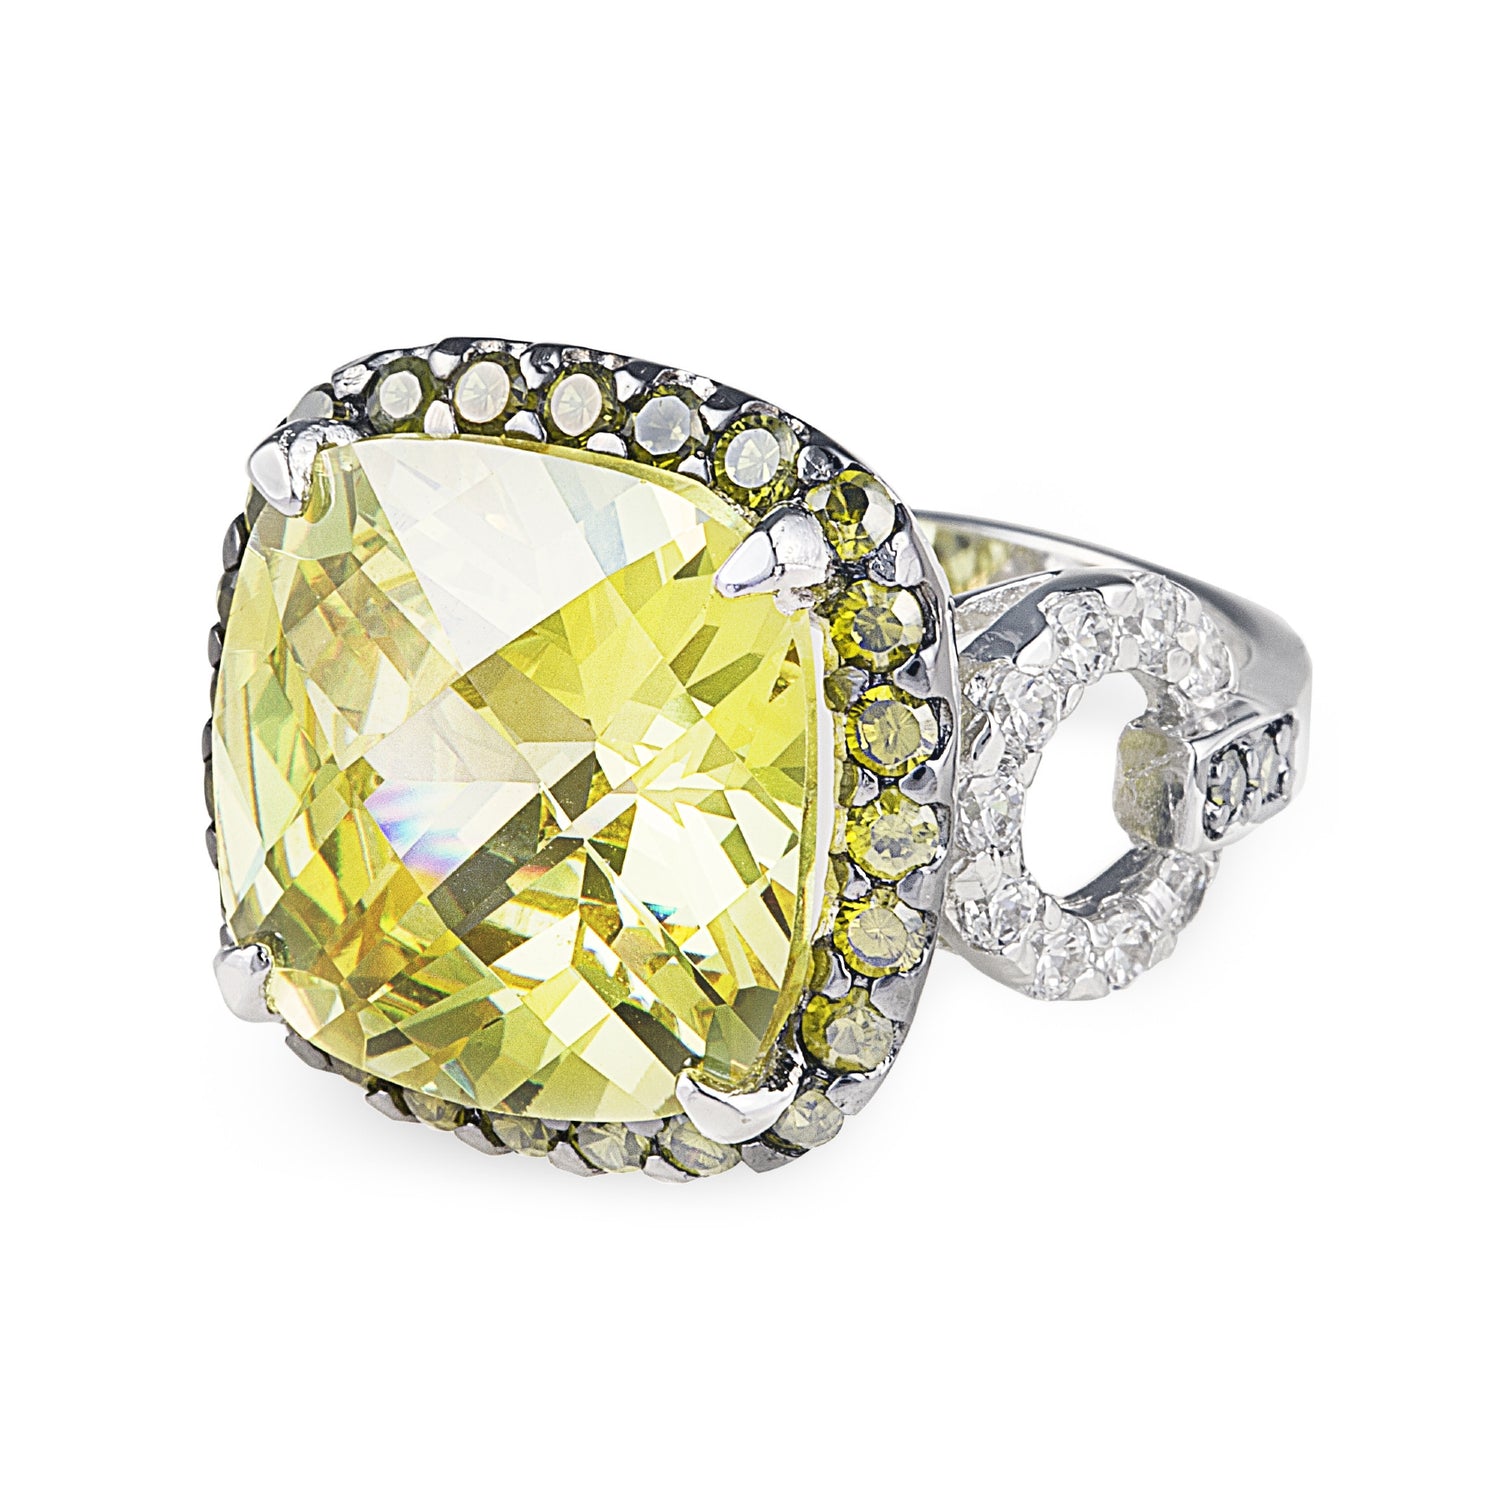 Taylor Vintage Ring in 925 Sterling Silver with green peridot and black cubic zirconia. Worldwide shipping.